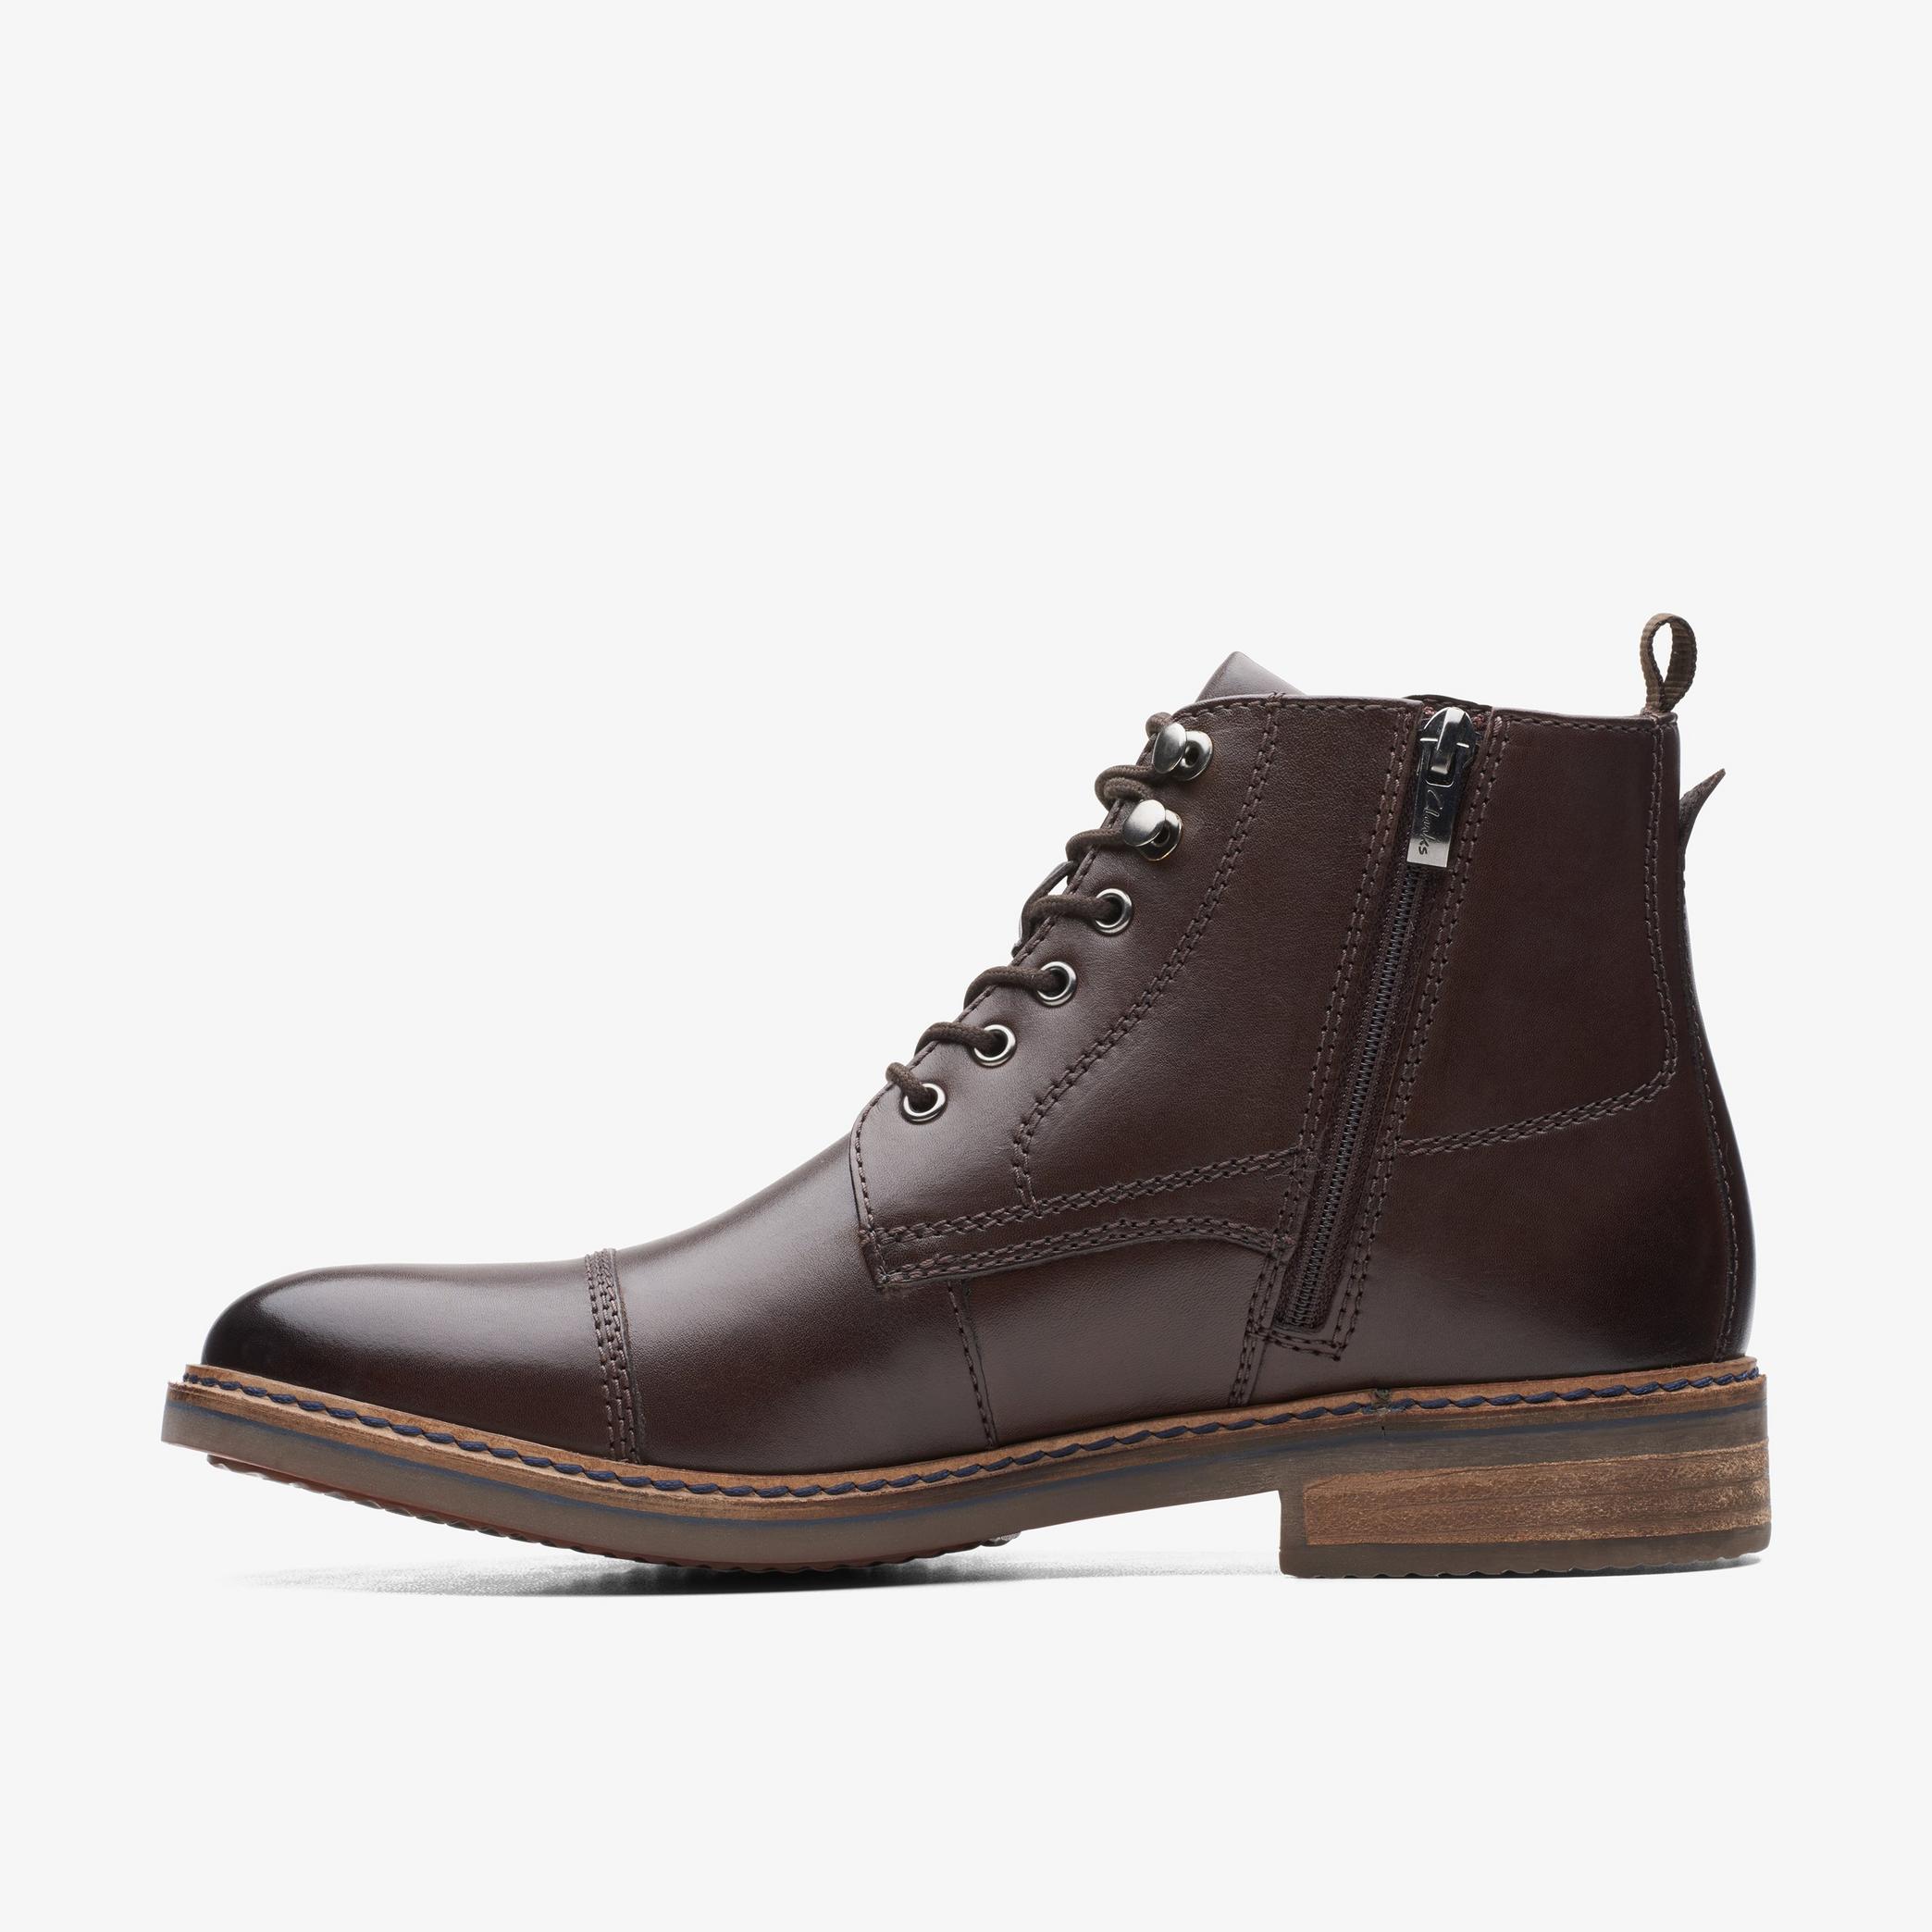 Blackford Rise Dark Brown Leather Ankle Boots, view 2 of 6